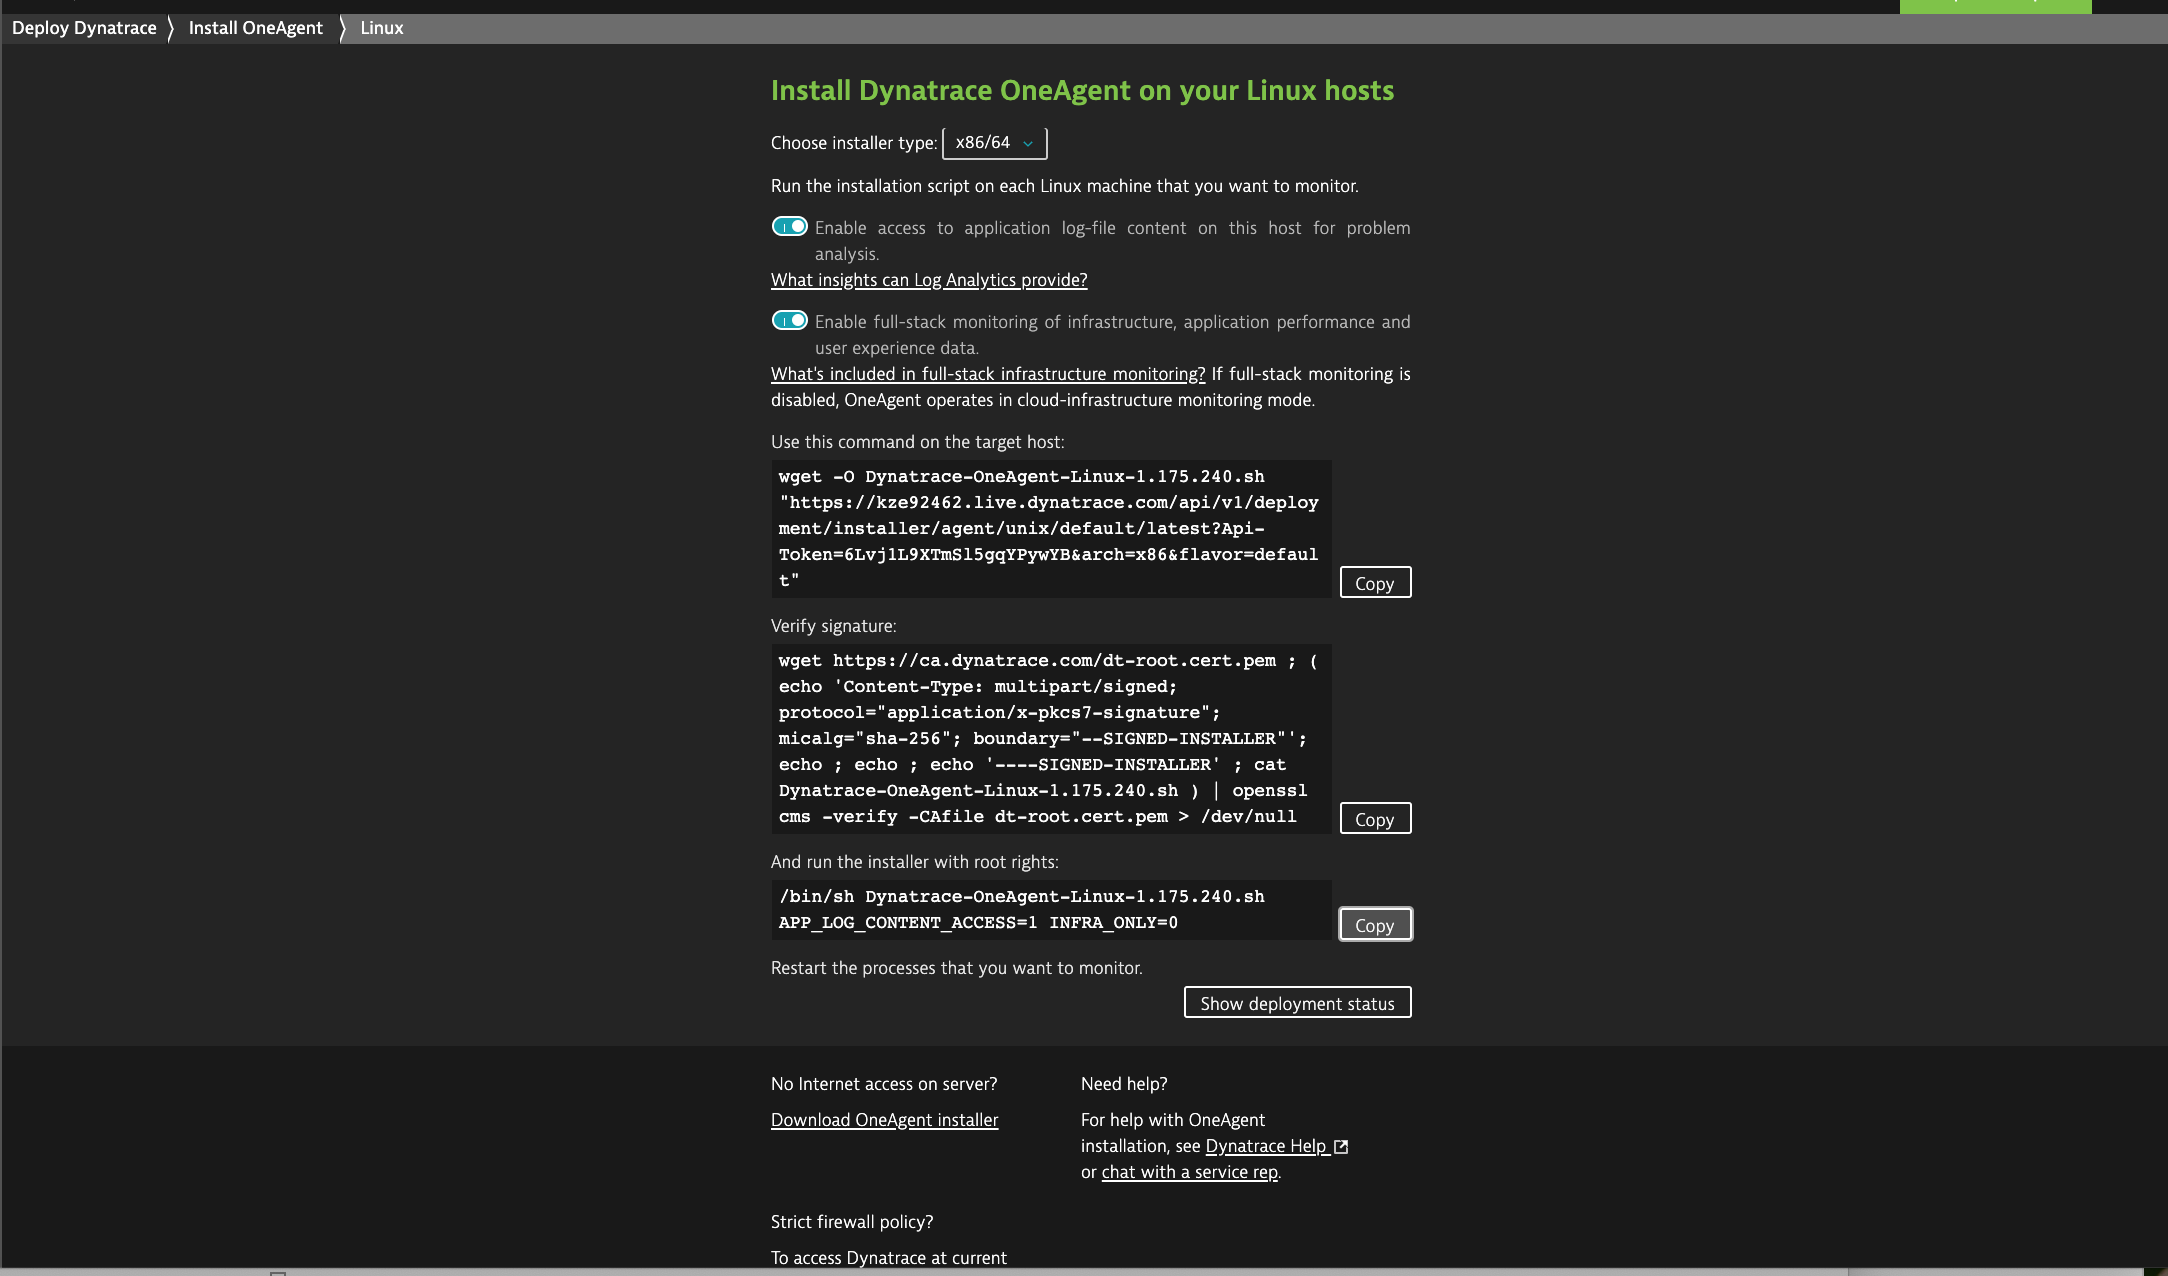 View Dynatrace OneAgent Installer